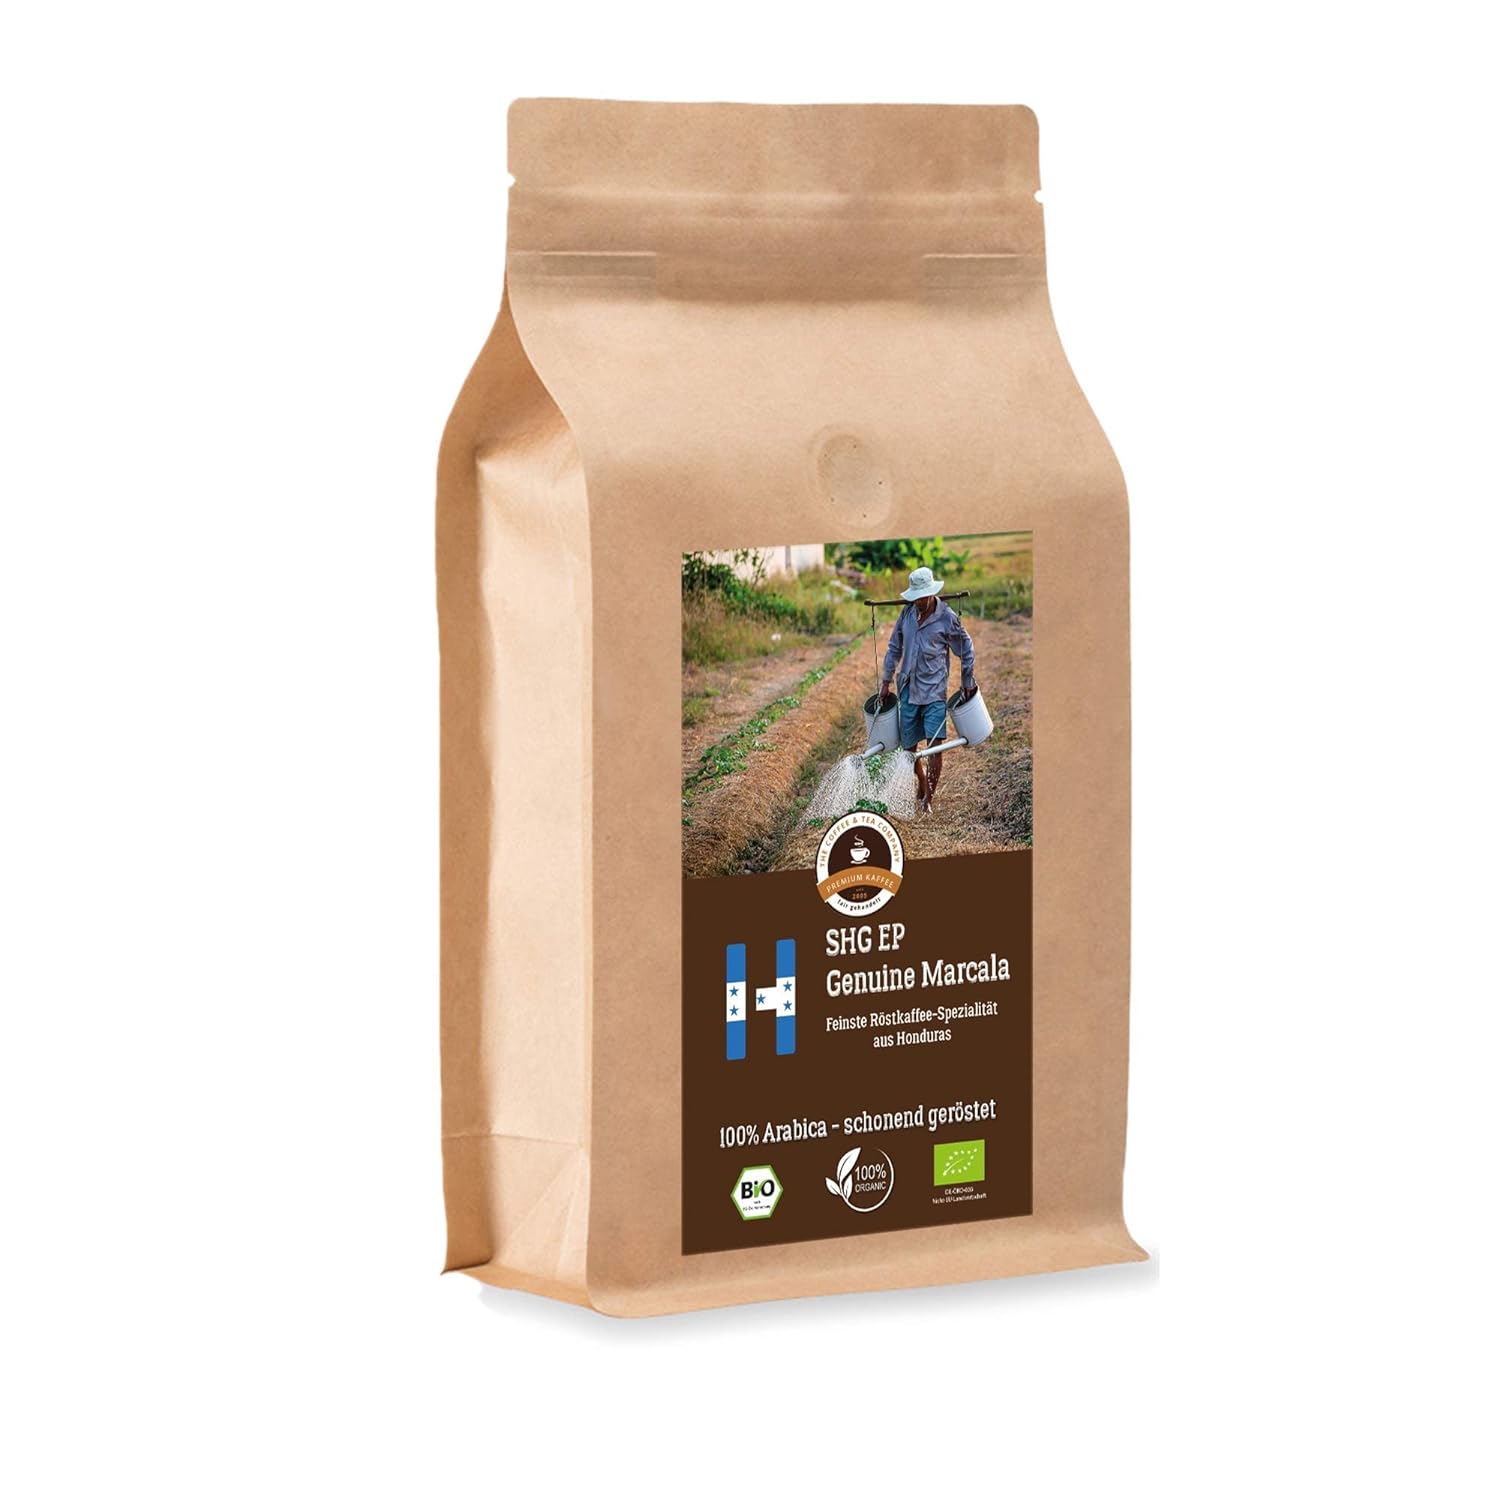 Coffee Globetrotter - Organic Honduras Genuine Marcala - 200 g Whole Bean - for Fully Automatic Coffee Machine, Coffee Grinder, Hand Mill, Top Coffee - Roasted Coffee from Organic Cultivation